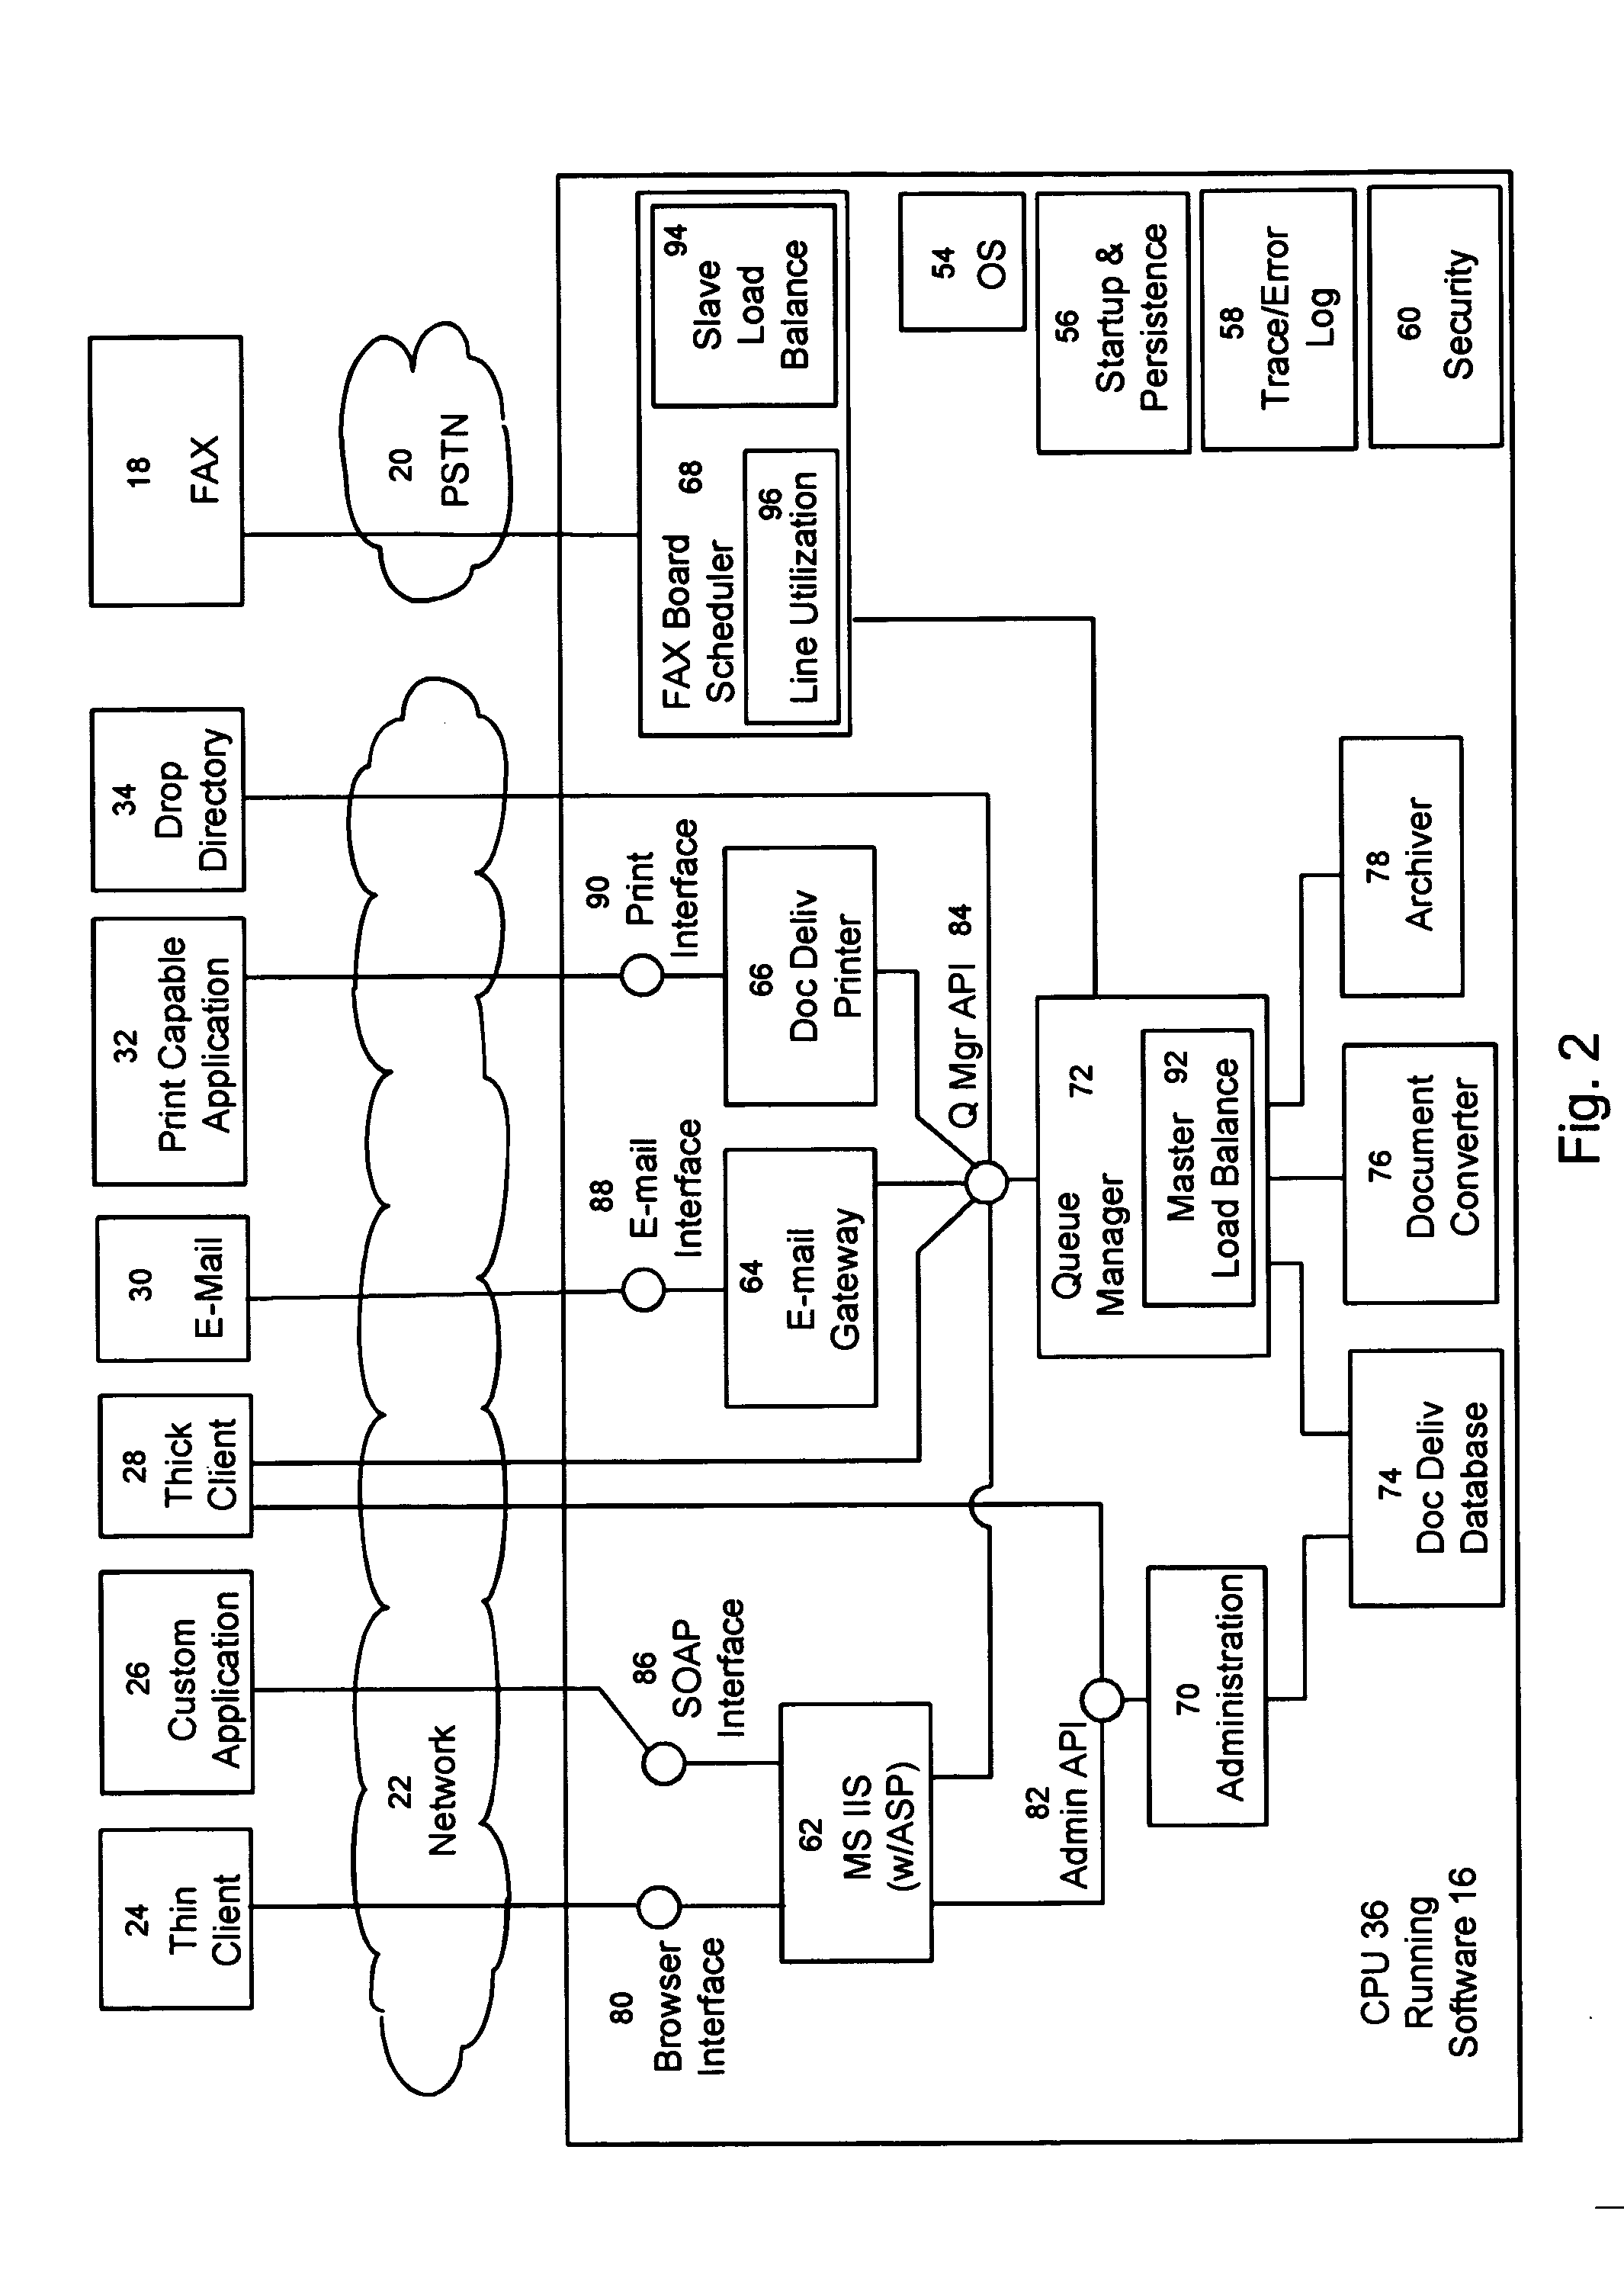 Integrated document delivery method and apparatus